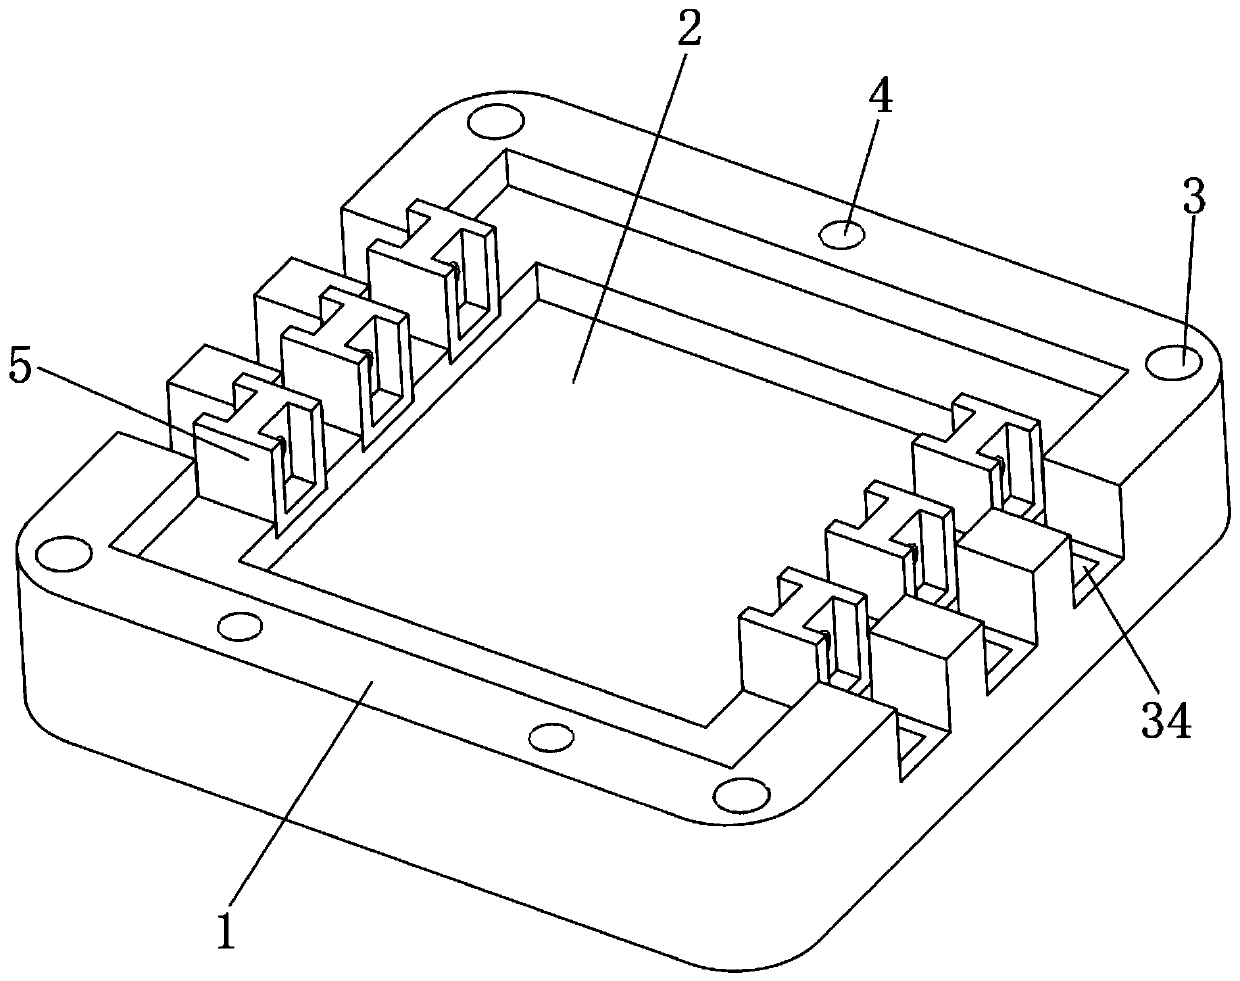 Connecting structure of display circuit board in computer display screen